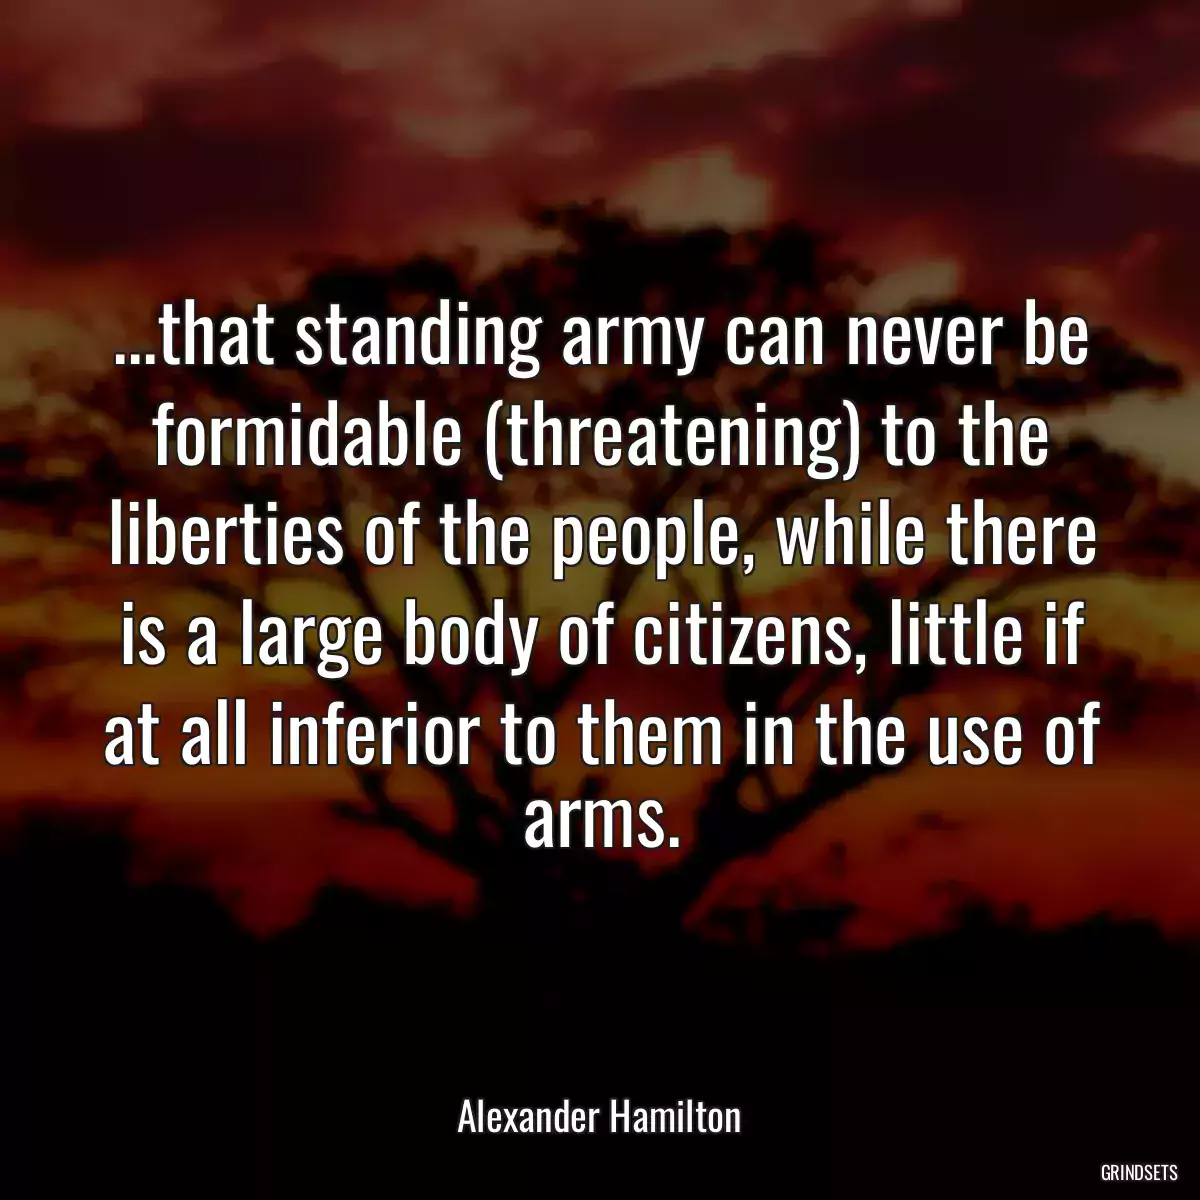 ...that standing army can never be formidable (threatening) to the liberties of the people, while there is a large body of citizens, little if at all inferior to them in the use of arms.